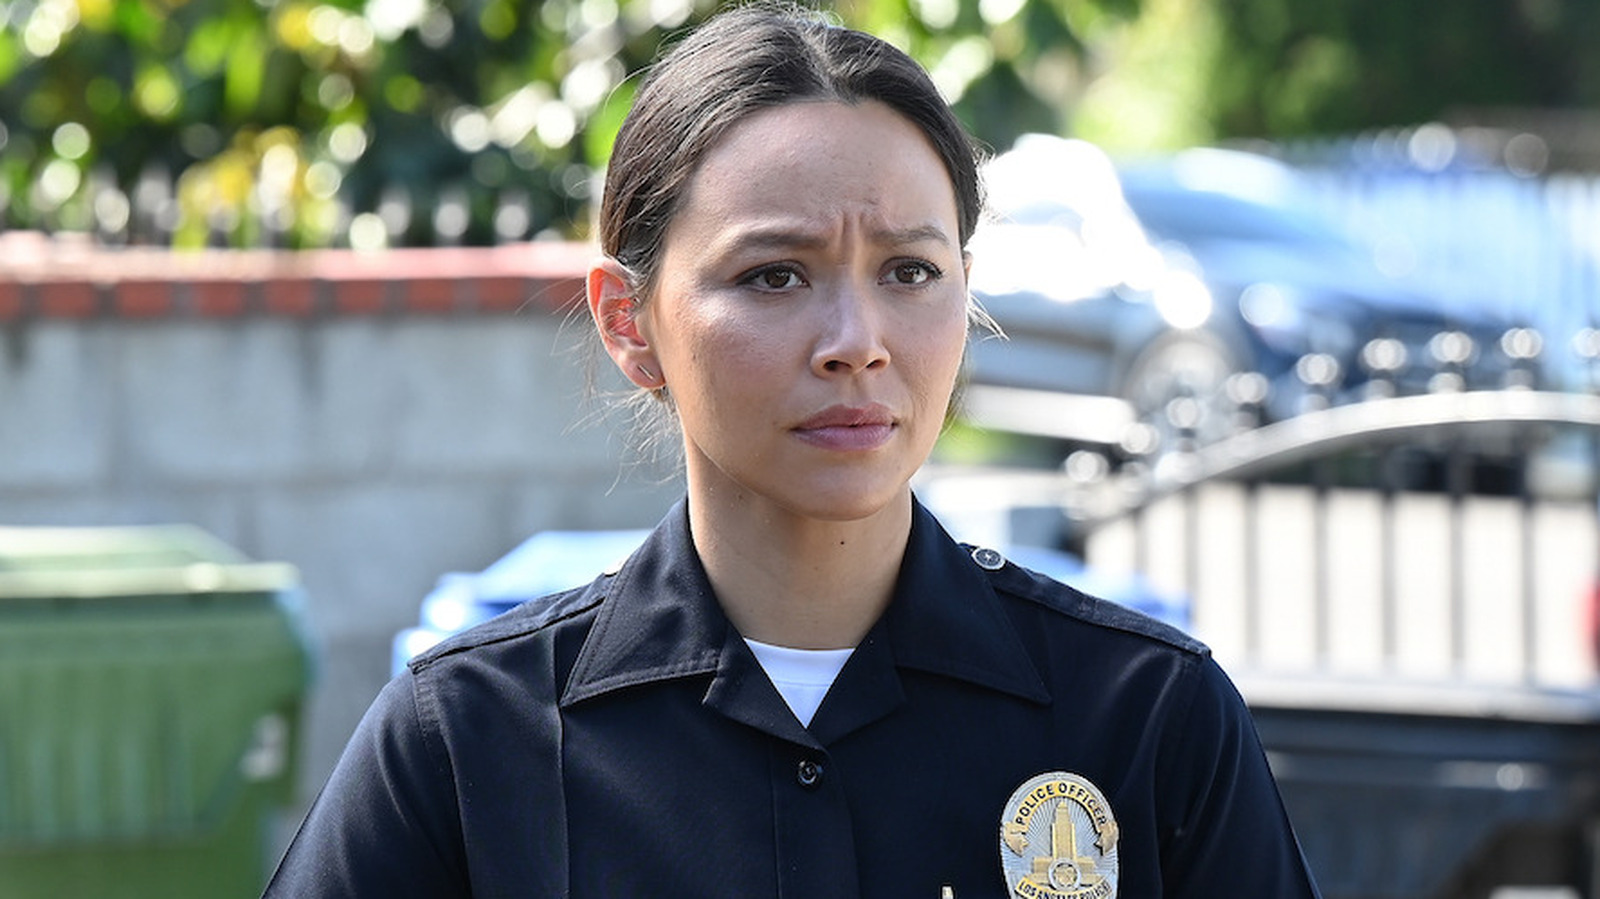 Why Lucy Chen From The Rookie Looks So Familiar